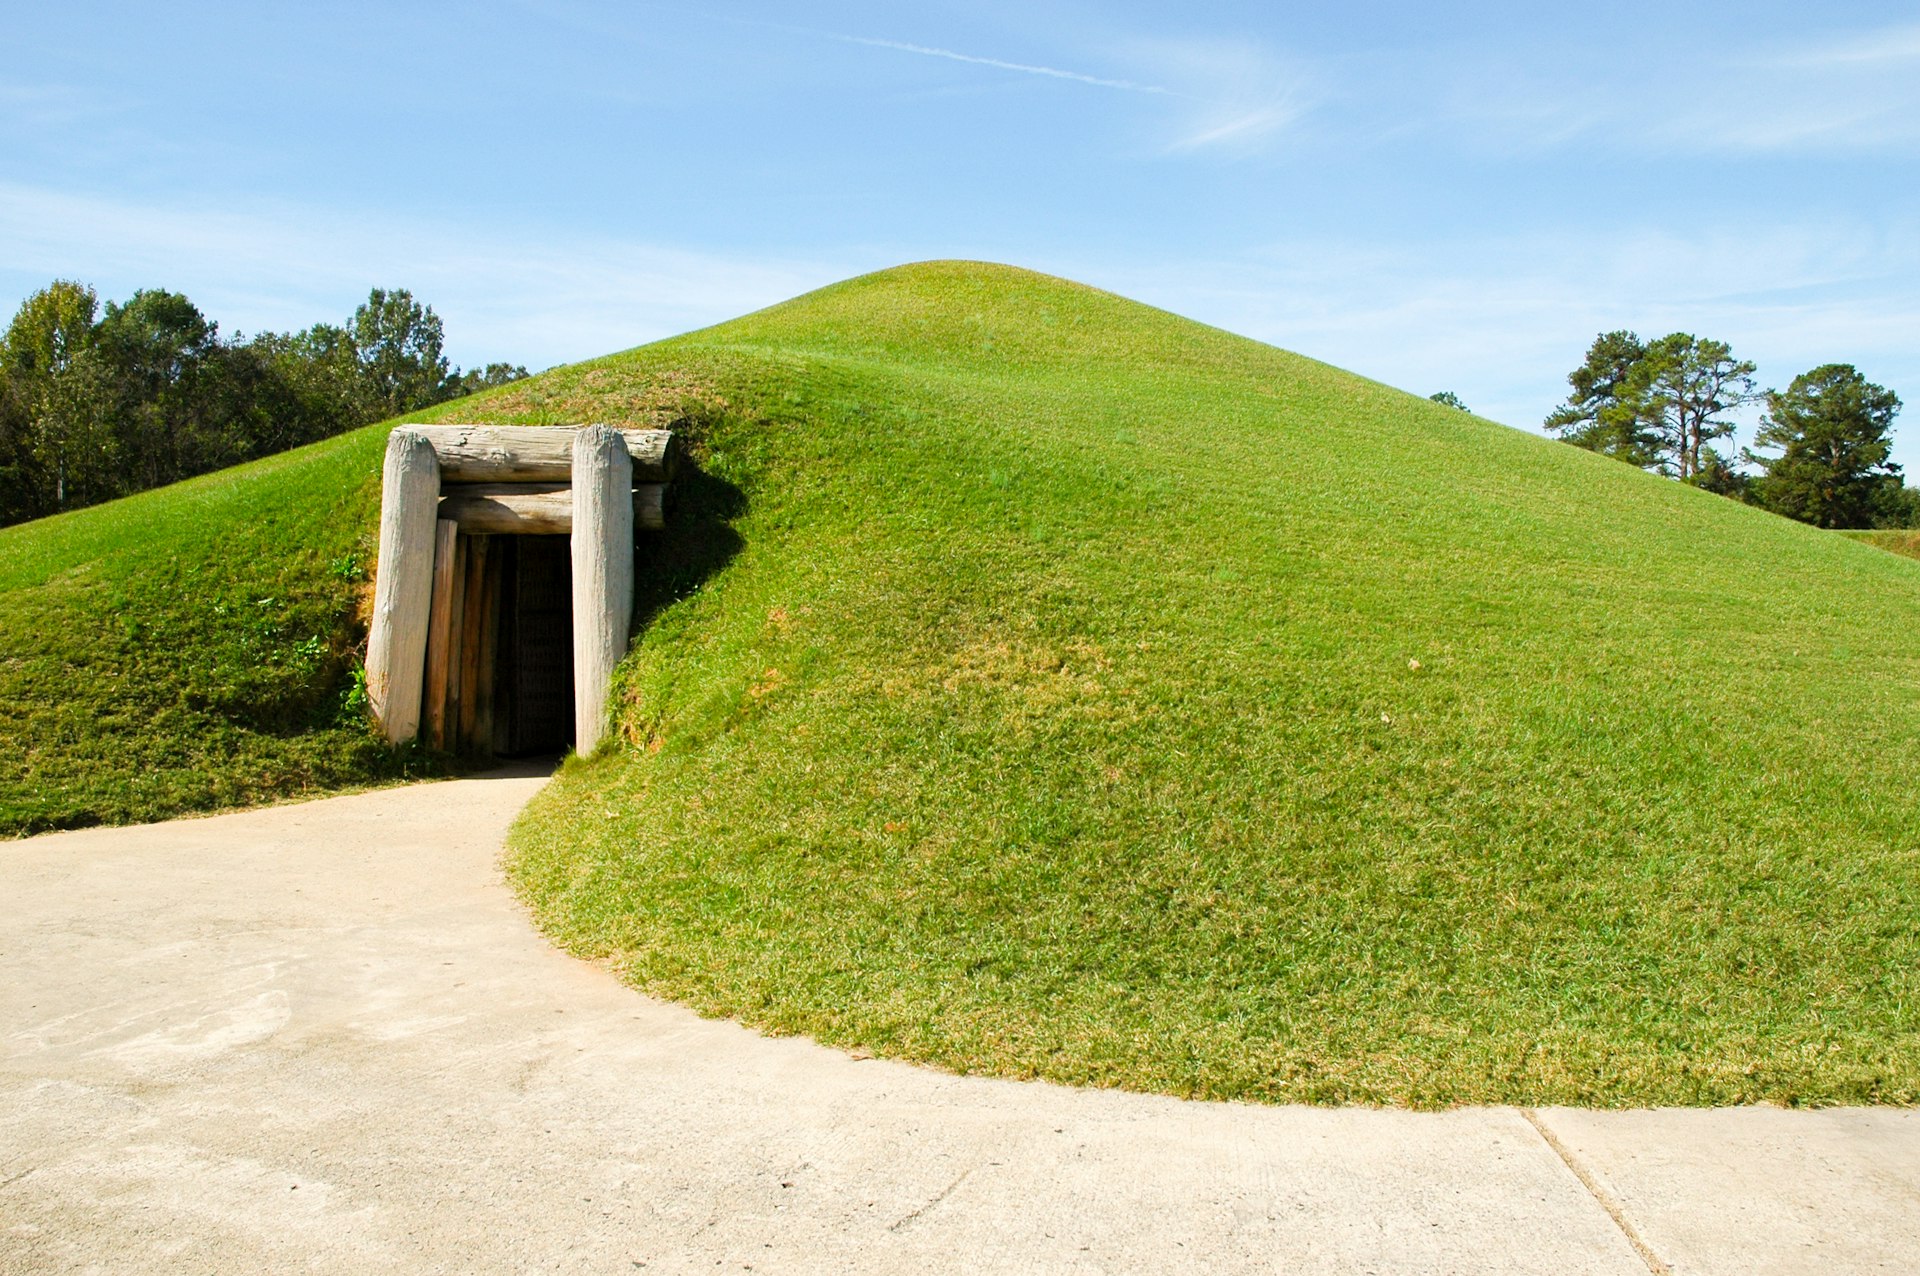 A green lawned mound with a doorway in it